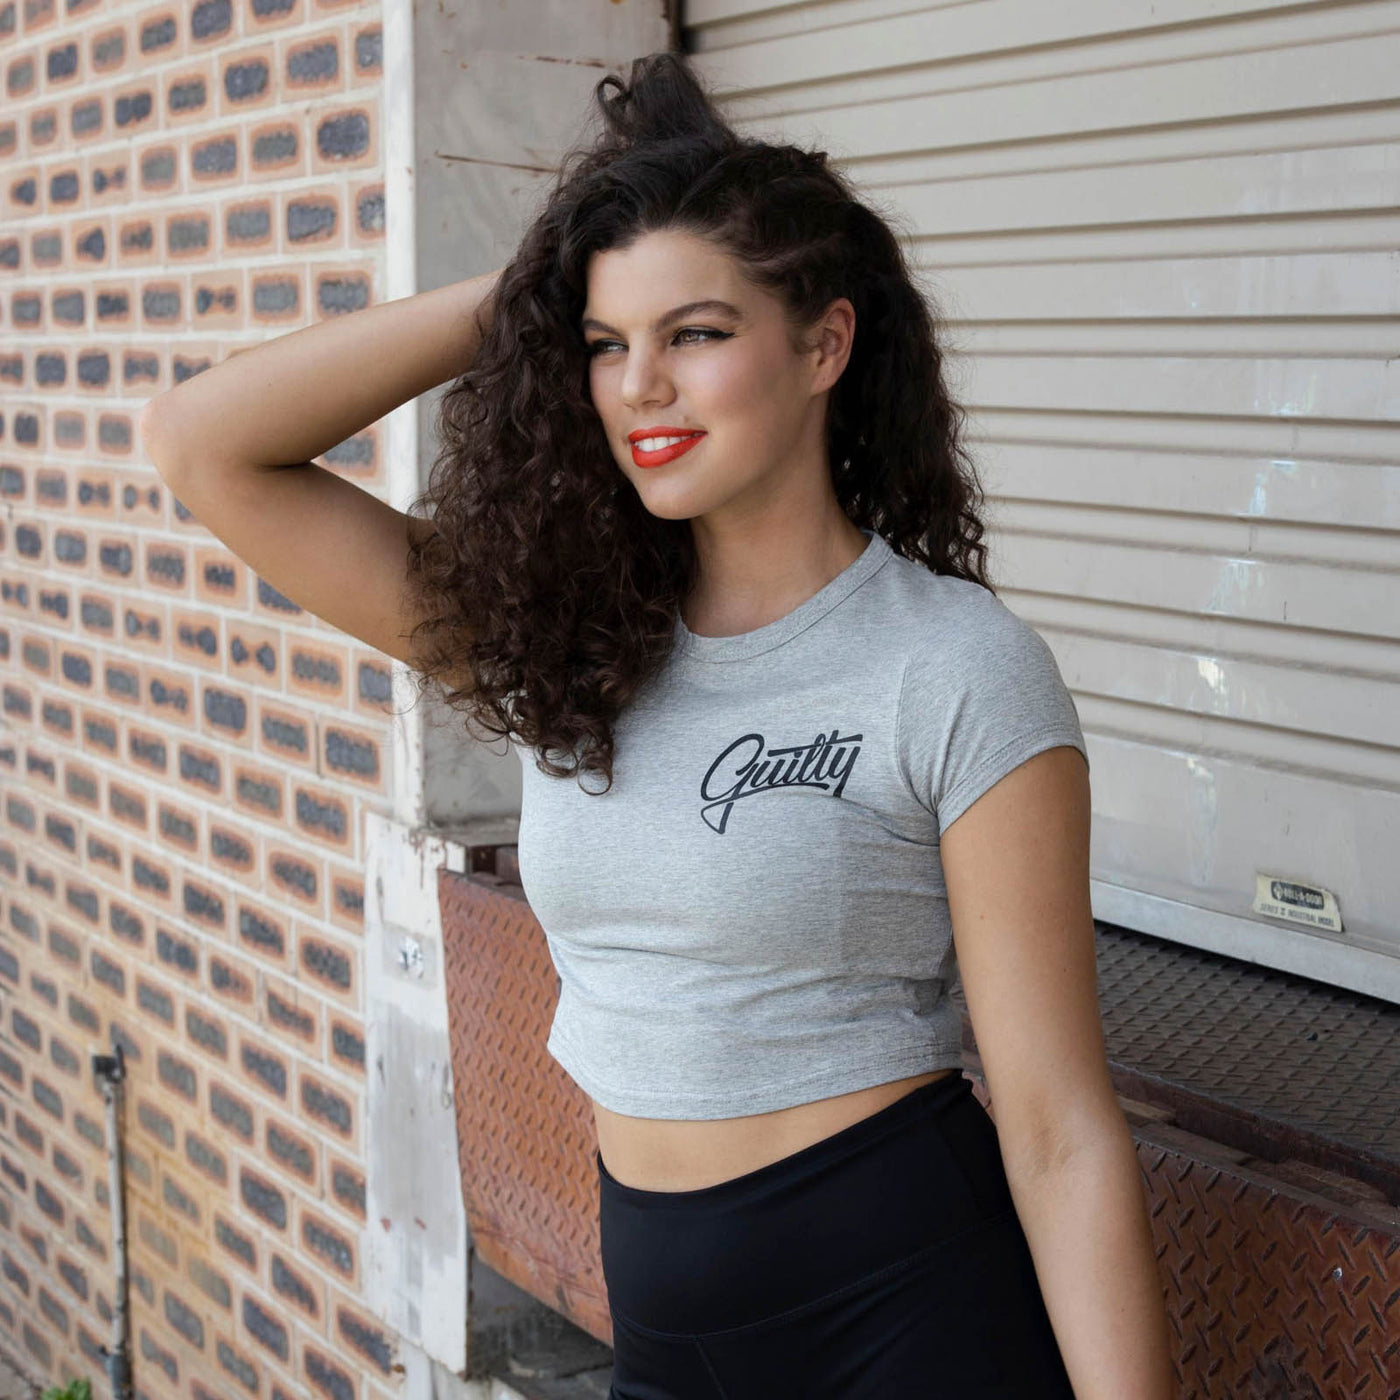 Guilty Apparel Crop Tee Grey - Casual and comfortable grey crop top with a black Guilty Apparel logo printed on it.